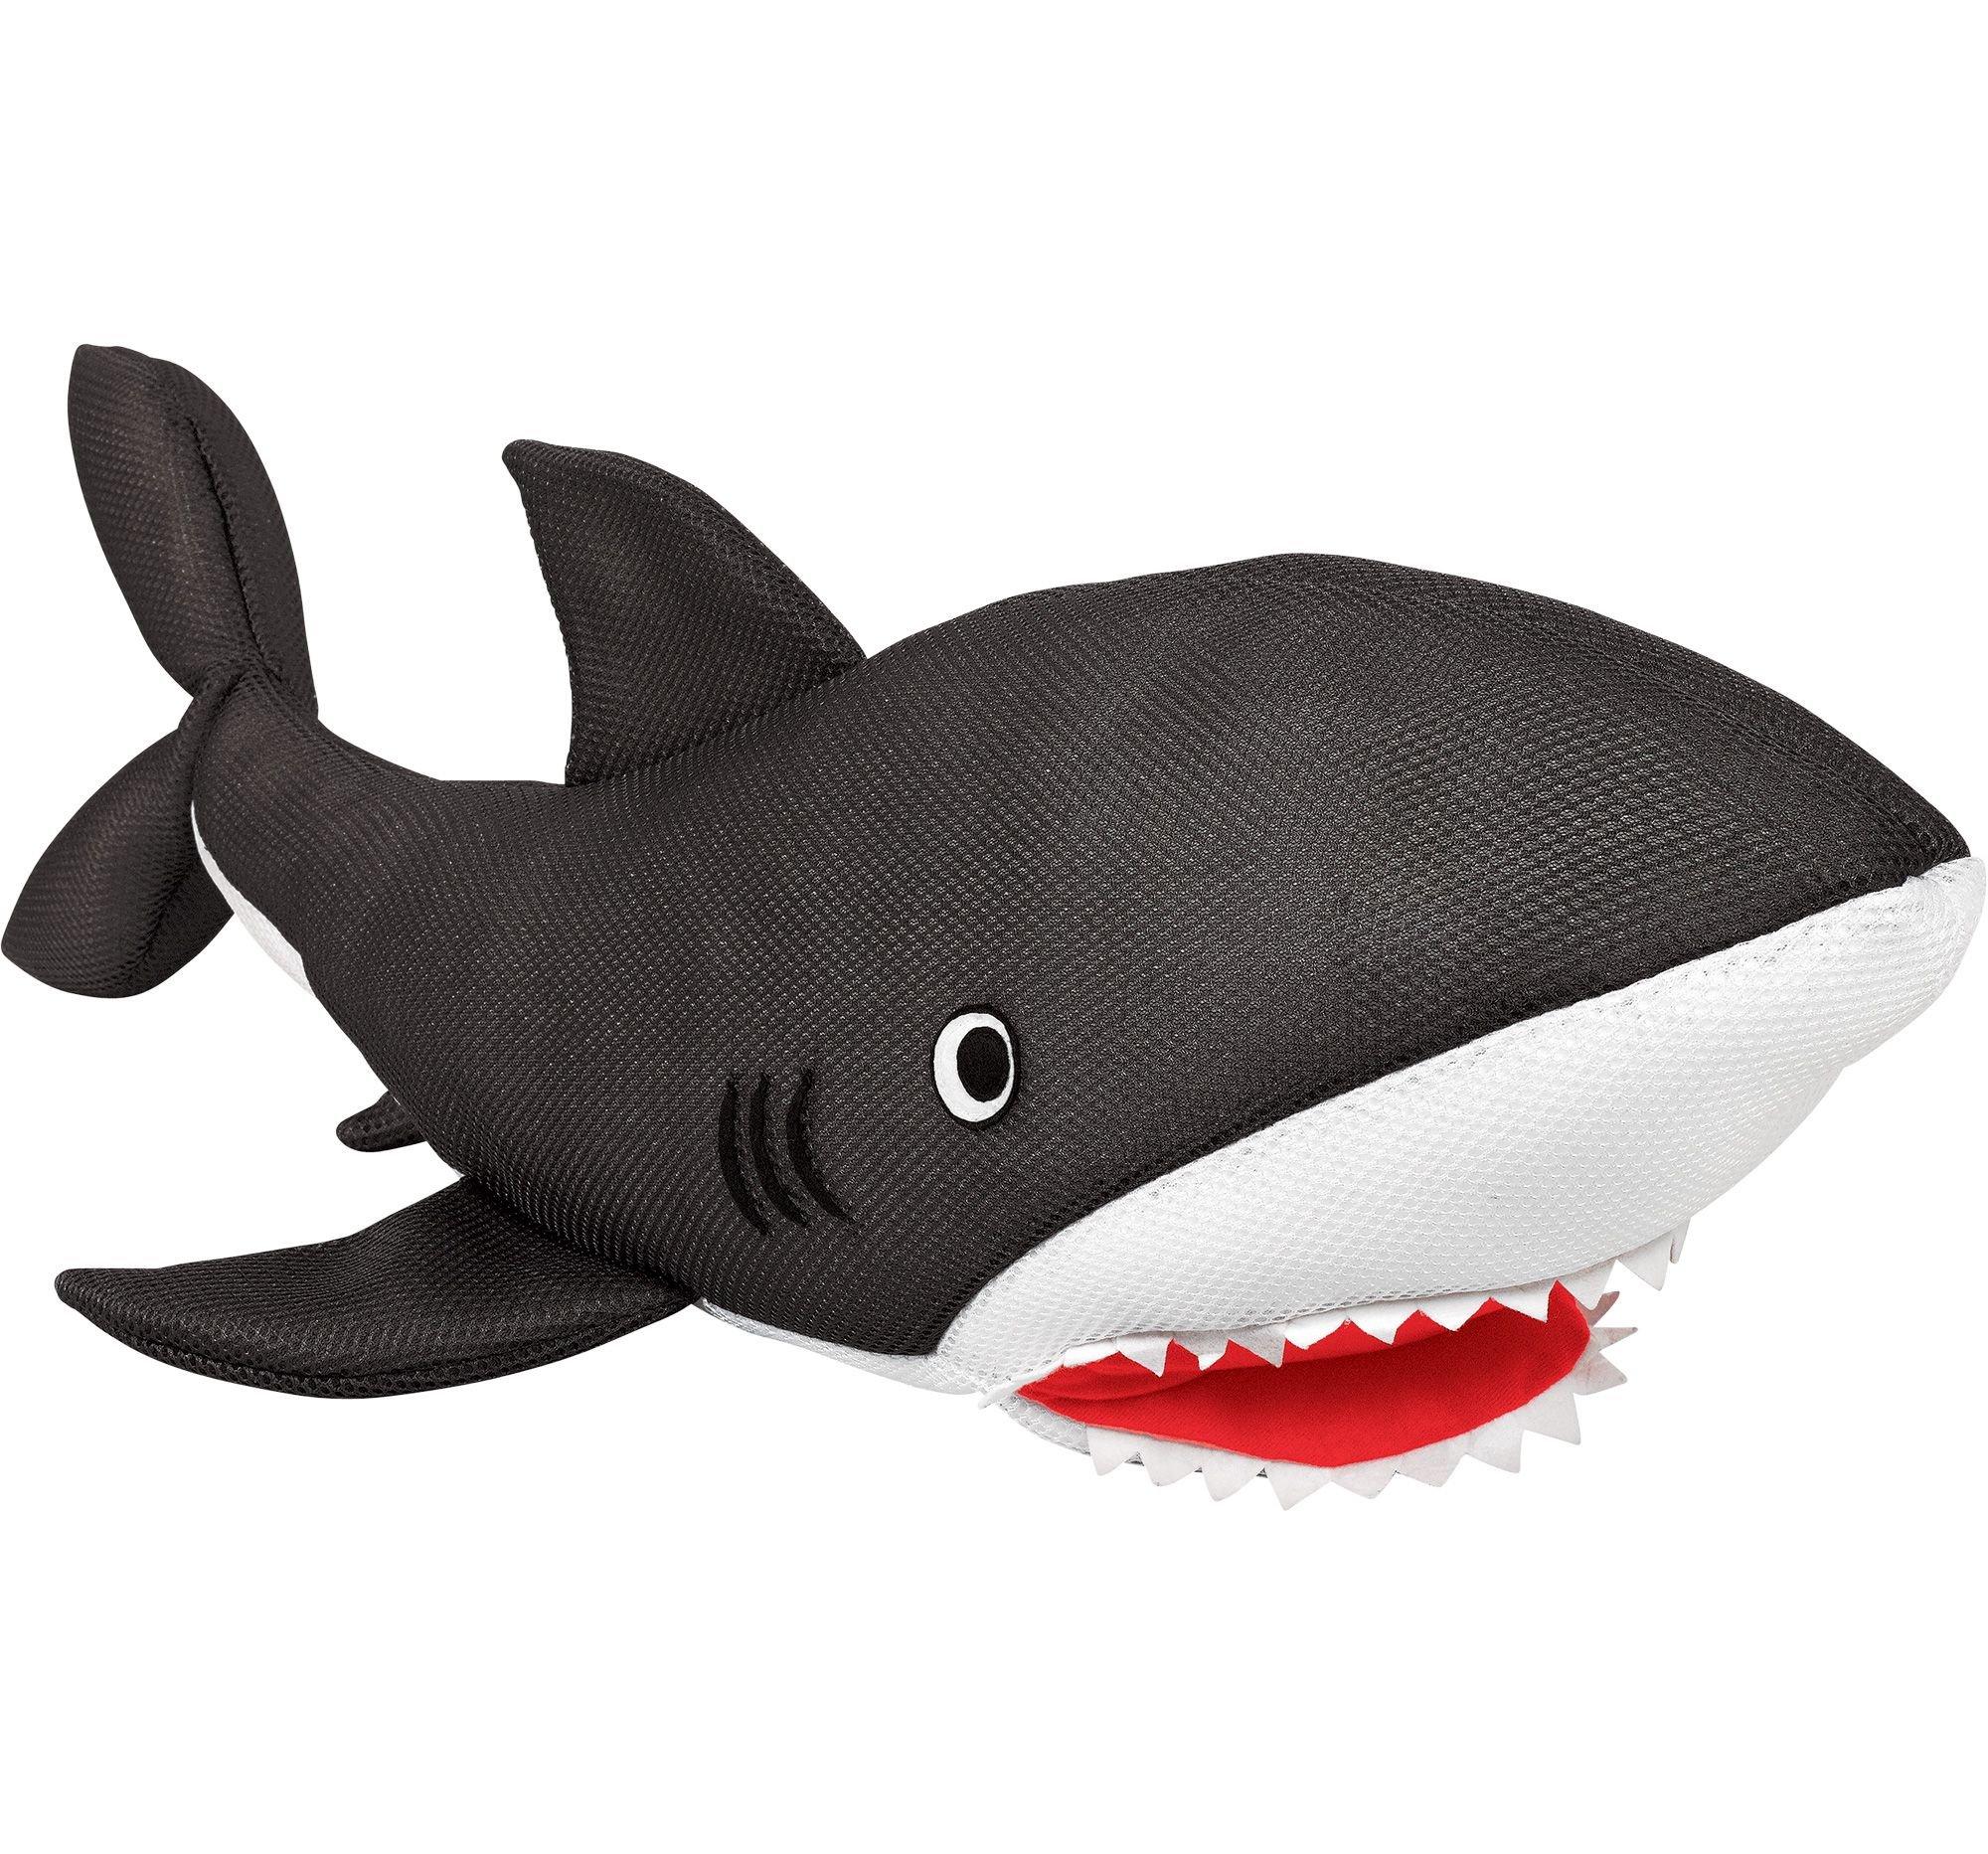 Floating Shark Pool Toy